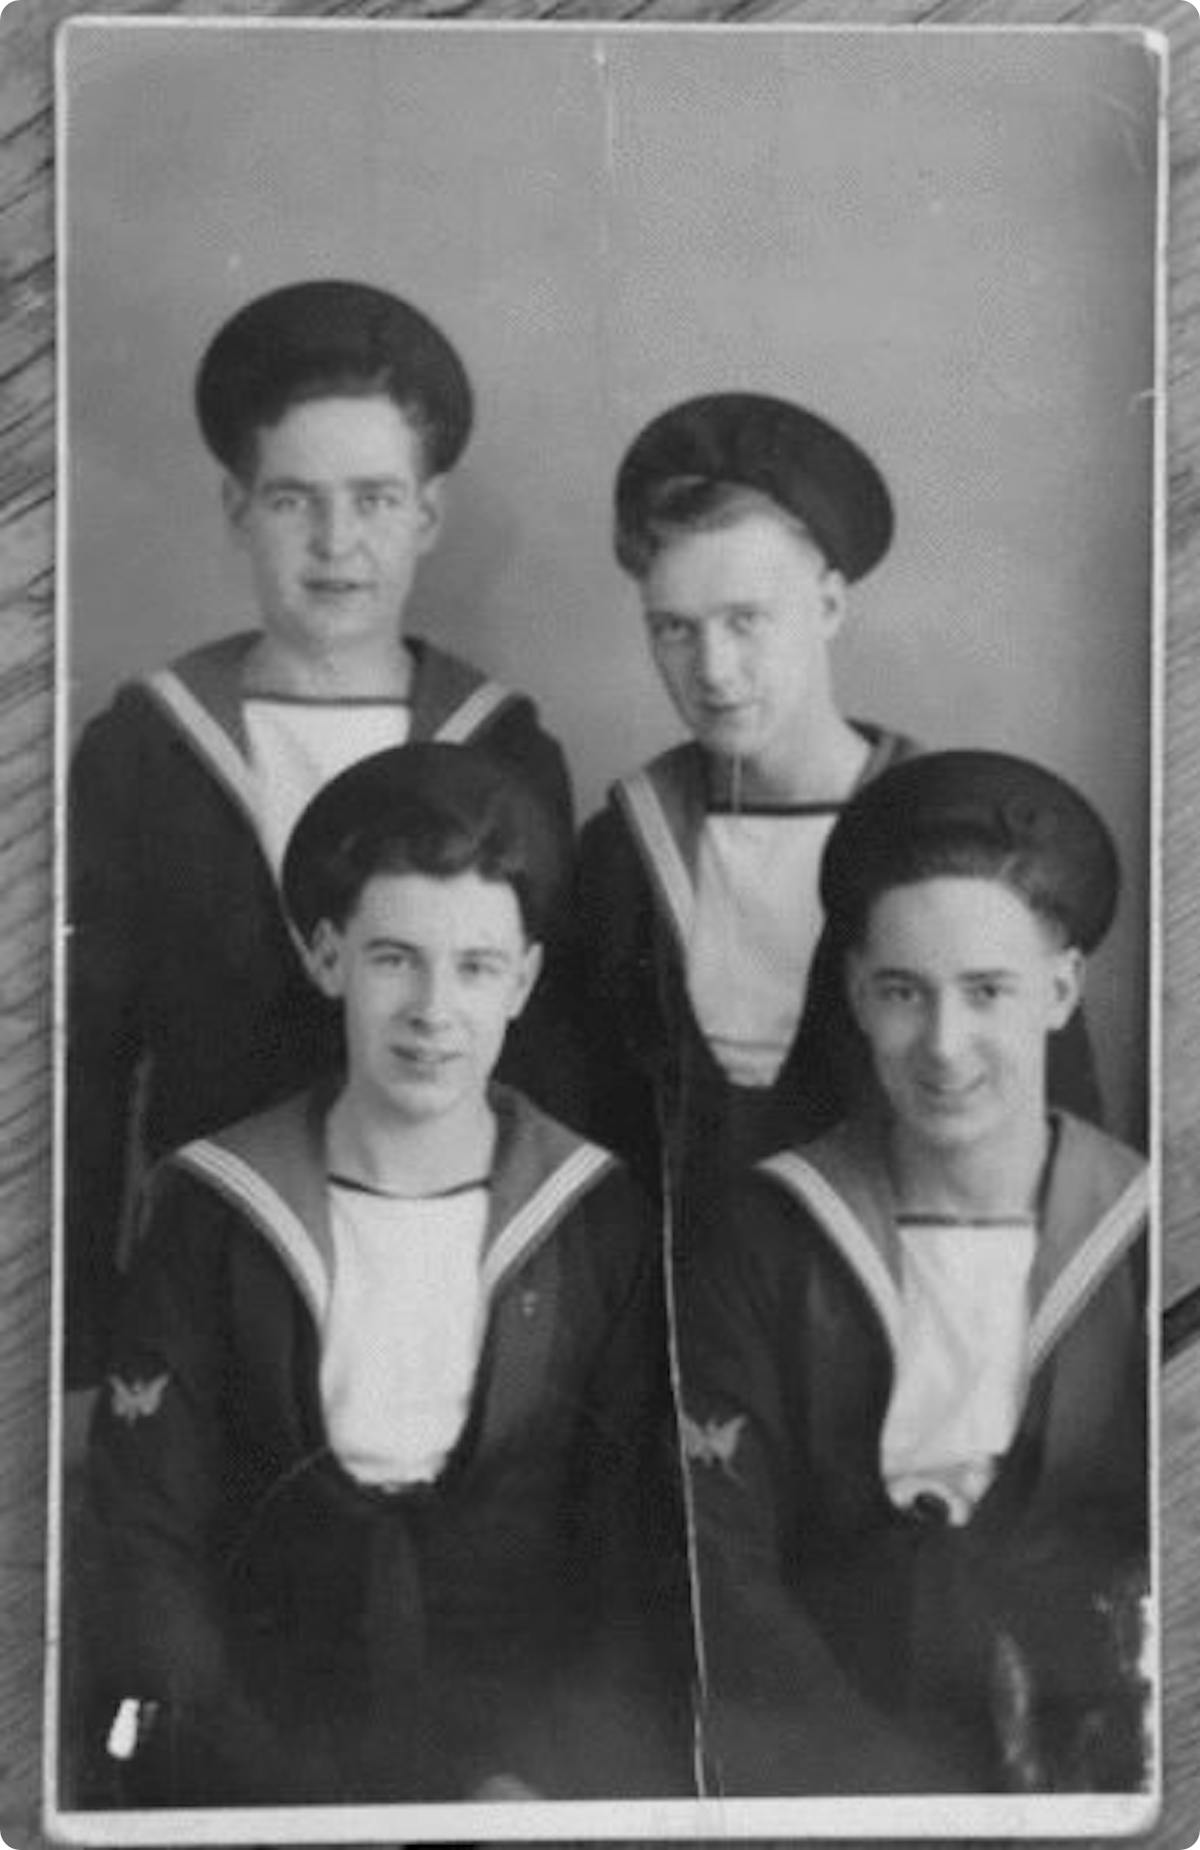 Ray (bottom right) and his Navy pals in 1943